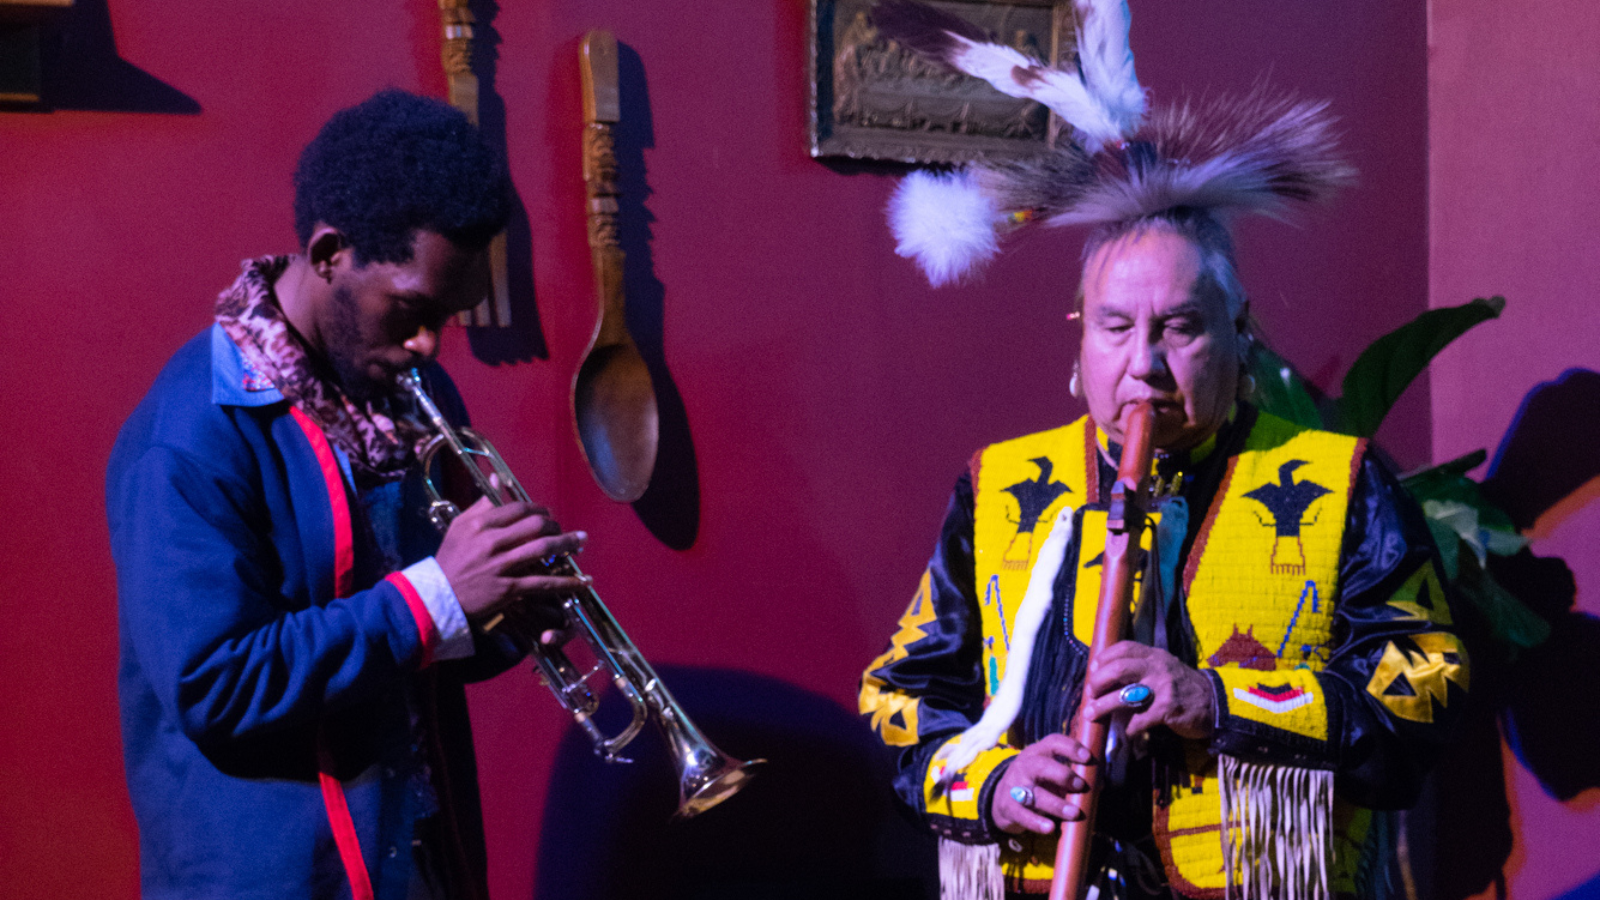 Photo caption: Actor/Dancer Richard Barea, an elder of the indigenous Omaha tribe, rehearses with young jazz musician (and Omaha native) Kafele Wiliams in preparation for a performance of the In[HEIR]itance Project's play, Exodus: Resettlement, in November of 2019. Credit: Harrison Martin.